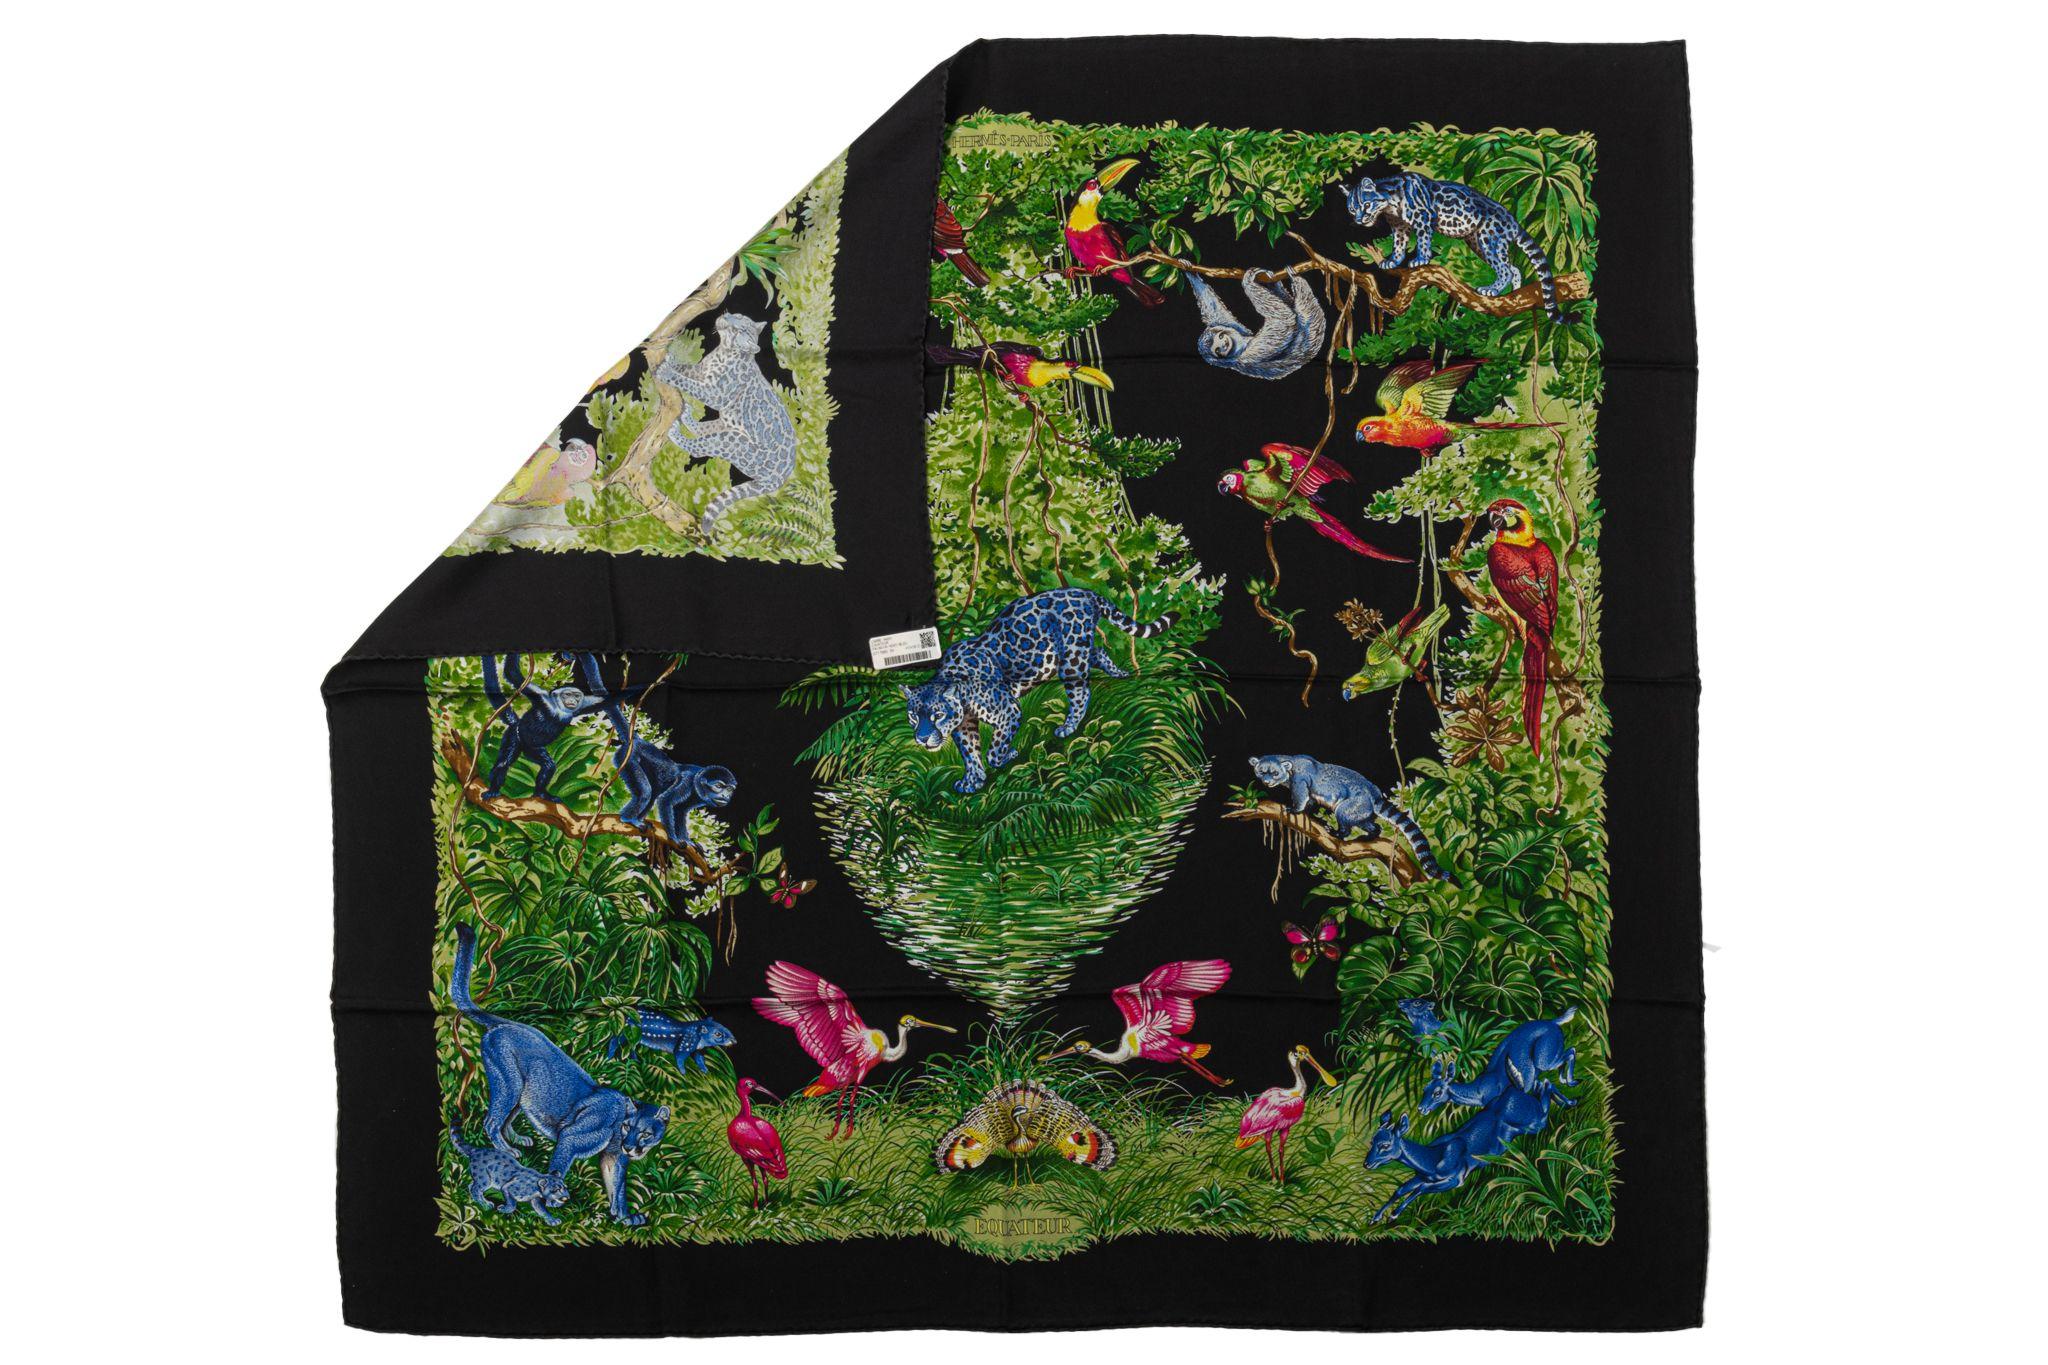 Hermès silk Equateur scarf designed by Robert Dallet. Black and green colorway with hand-rolled edges. Washed silk. Brand new.
